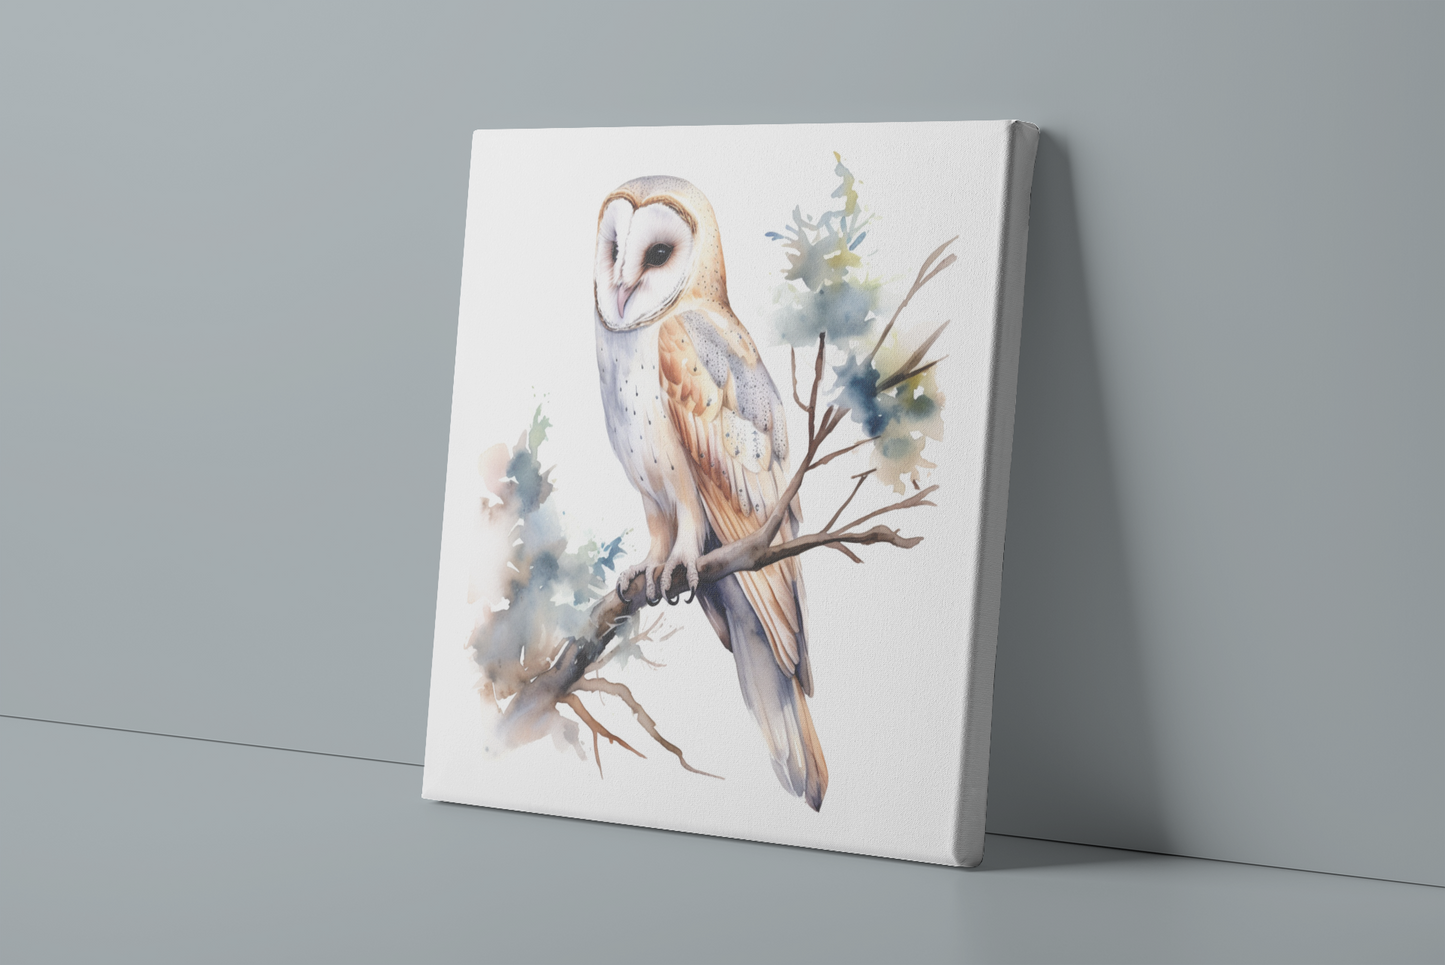 Barn Owl Canvas Wall Art, Watercolor Barn Owl Painting, Barn Owl on Branch, Nature Canvas Art, Bird Lover Gift, Ready to Hang